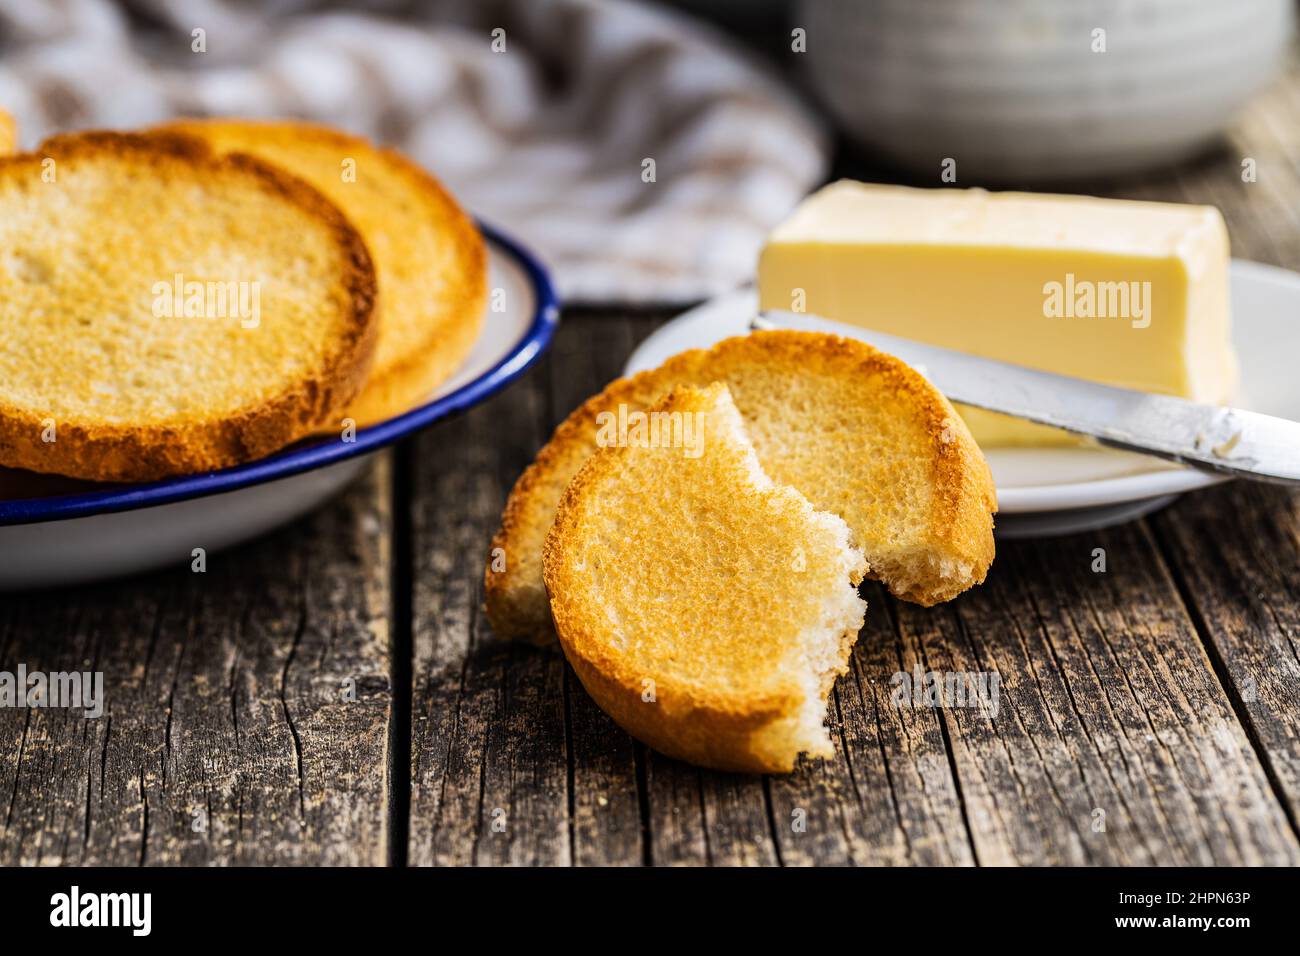 Dietary rusks bread. Crusty biscuits on wooden table. Stock Photo